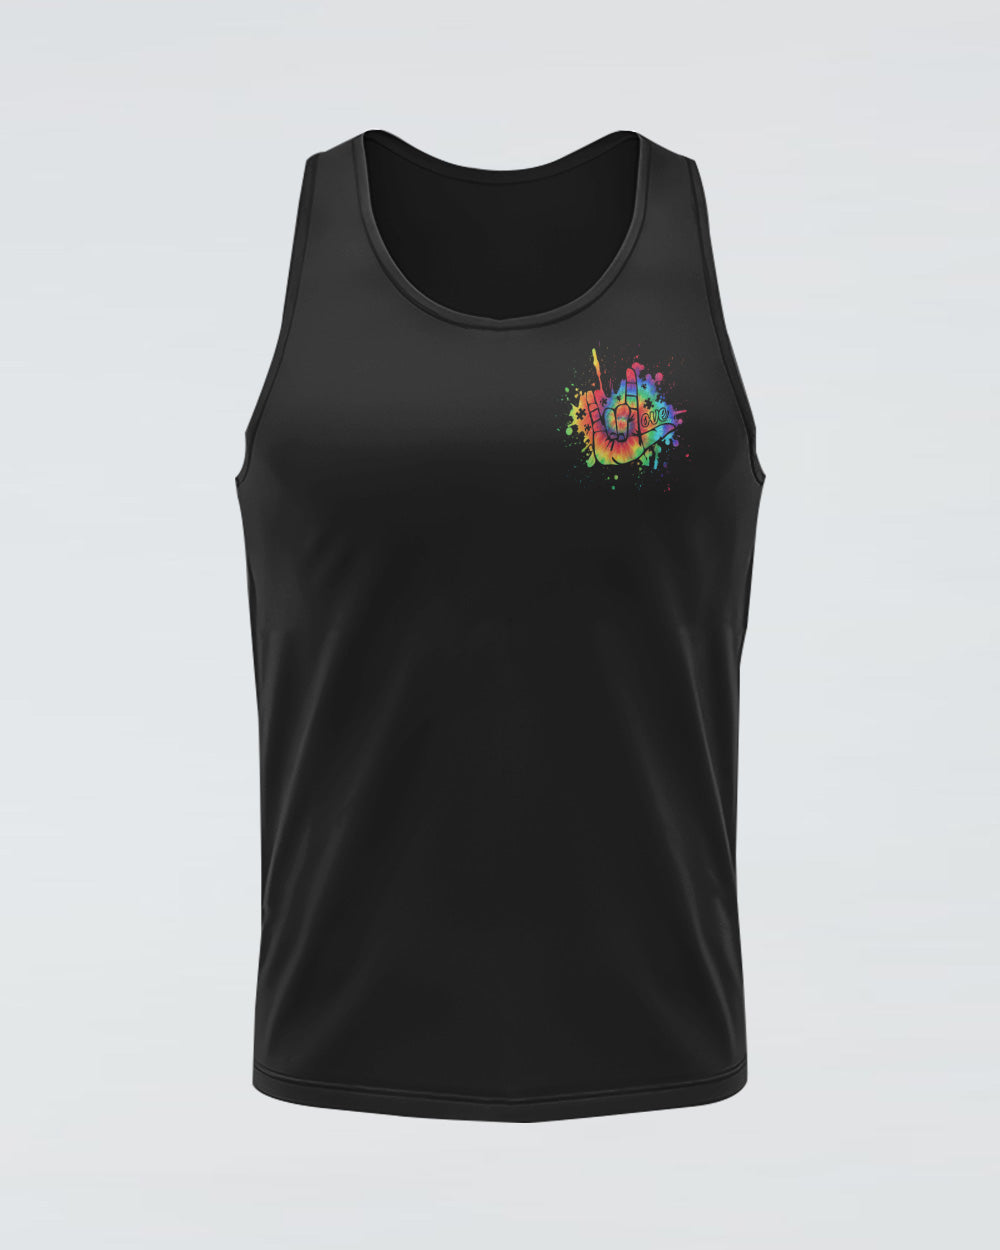 Someone With Autism Has Taught Me Women's Autism Awareness Tanks